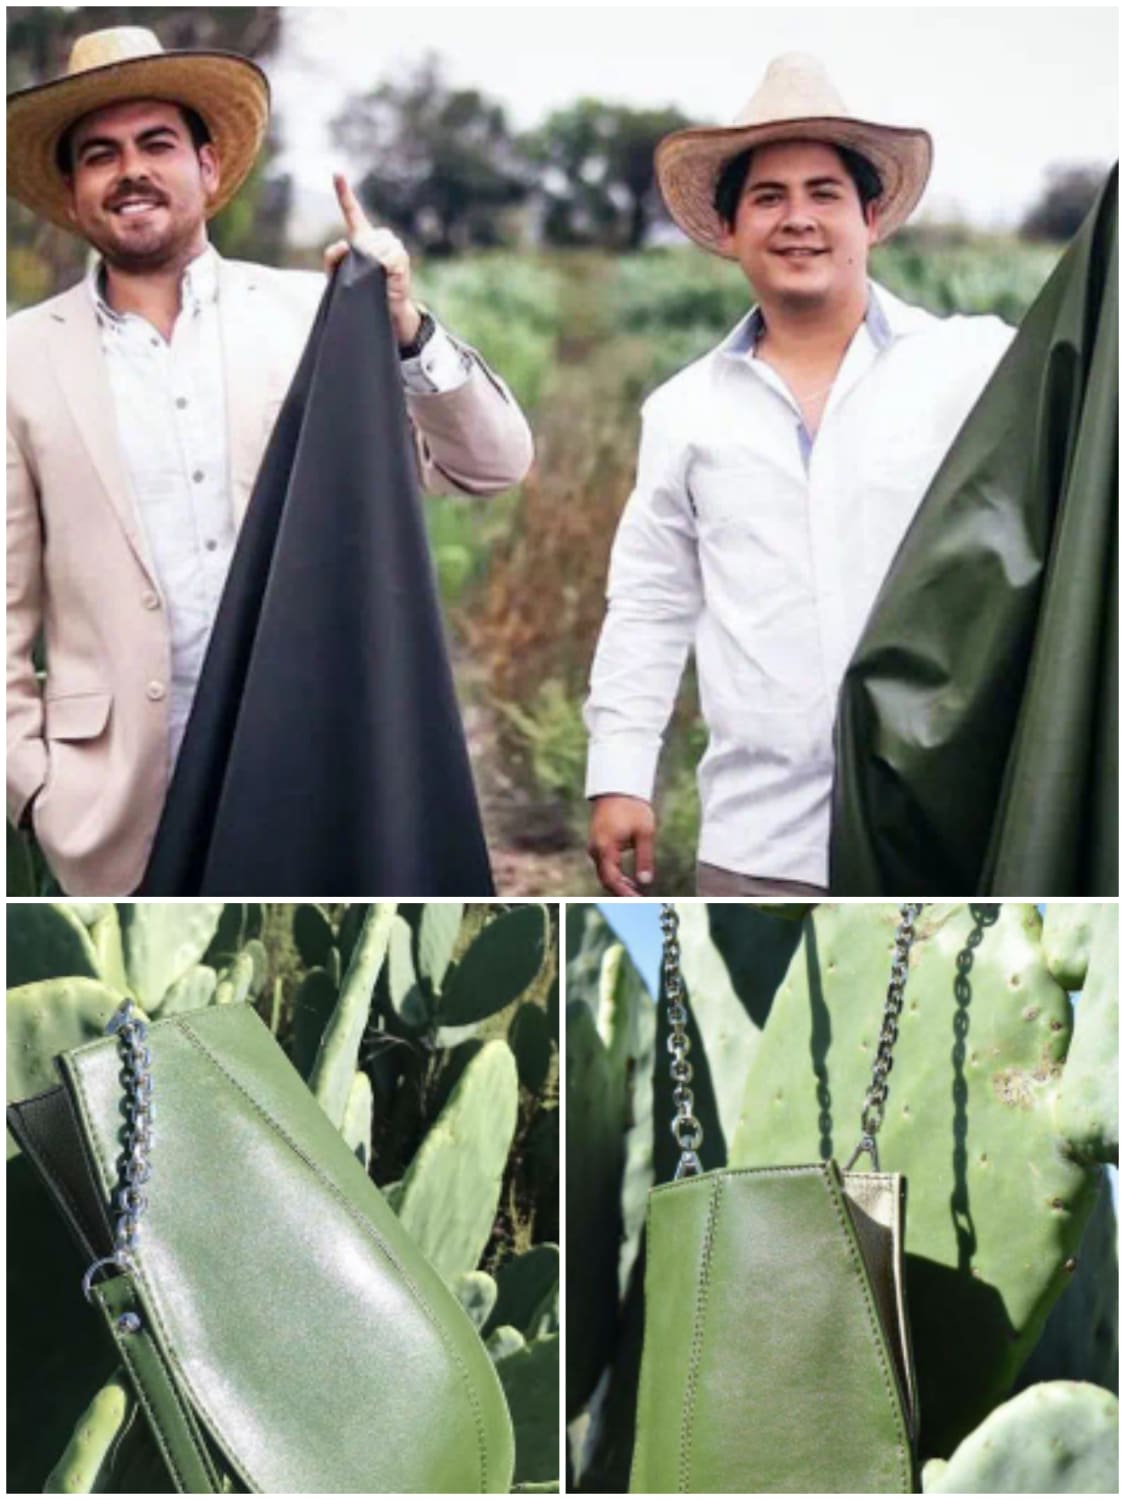 Two men Adrián Velarde & Marte Cázarez Created "Leather" from Cactus to save Animals and the Environment